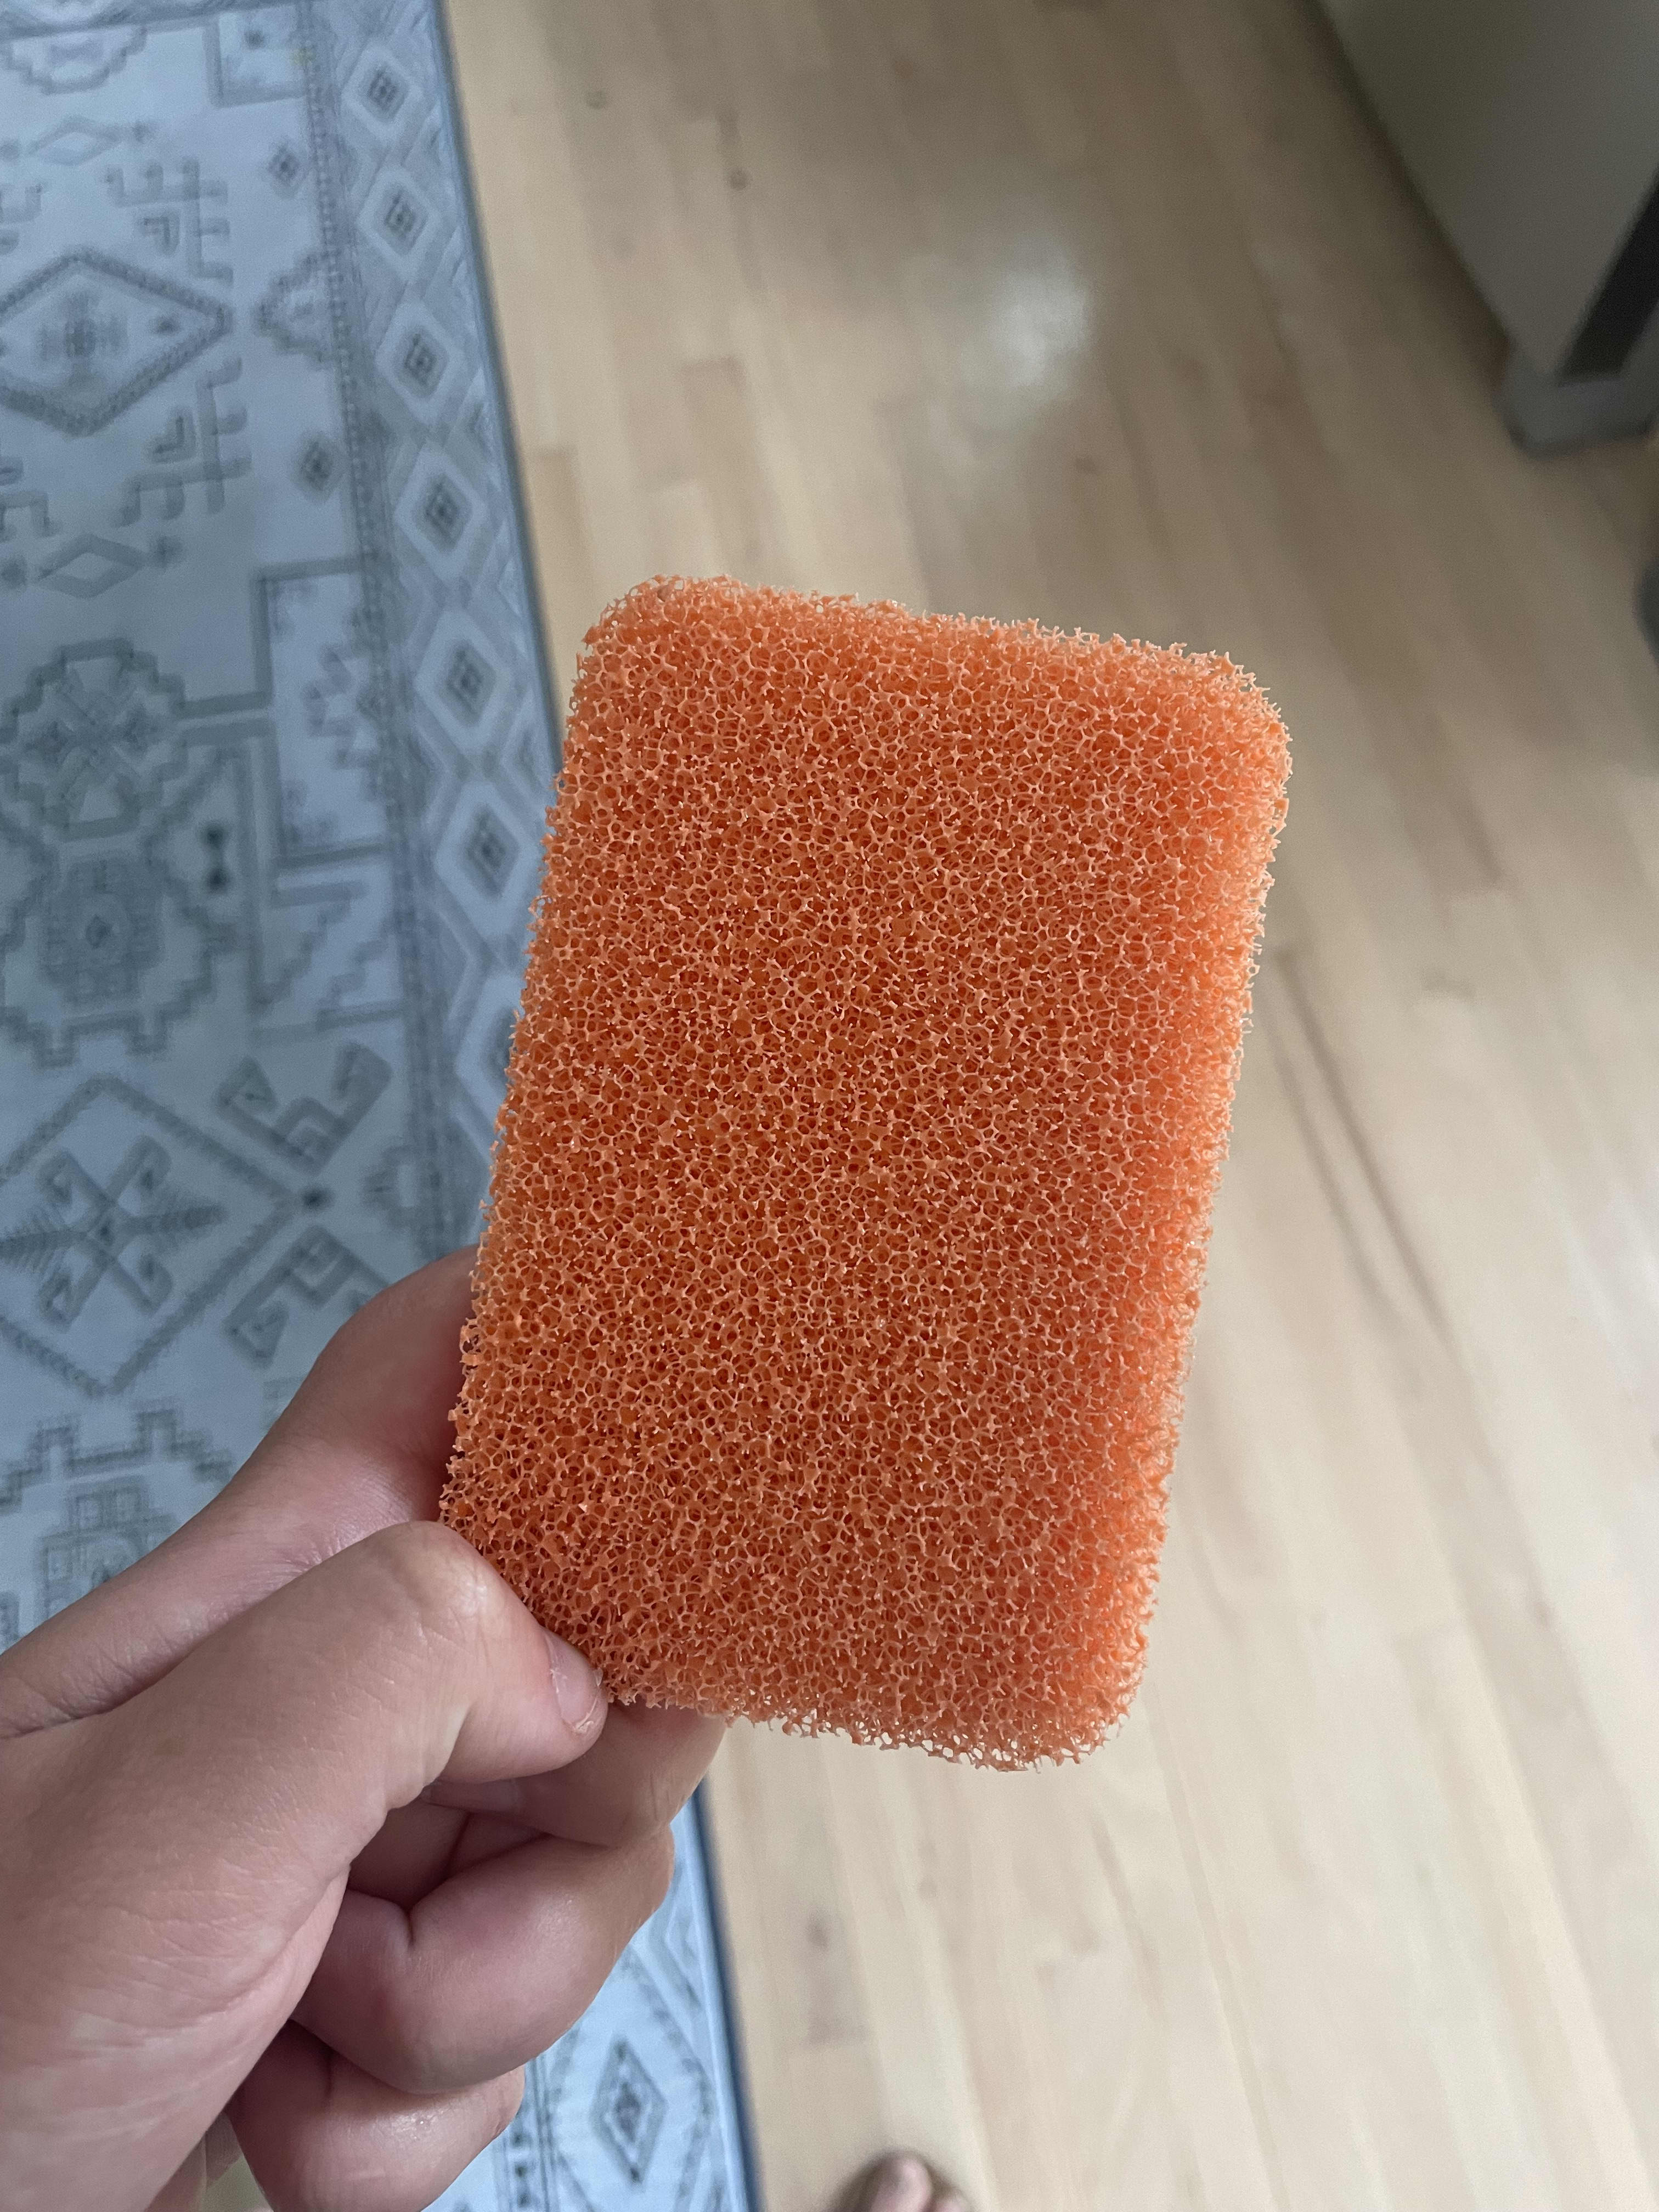 Peachy Clean Scrubber Review (Tested, Photos)